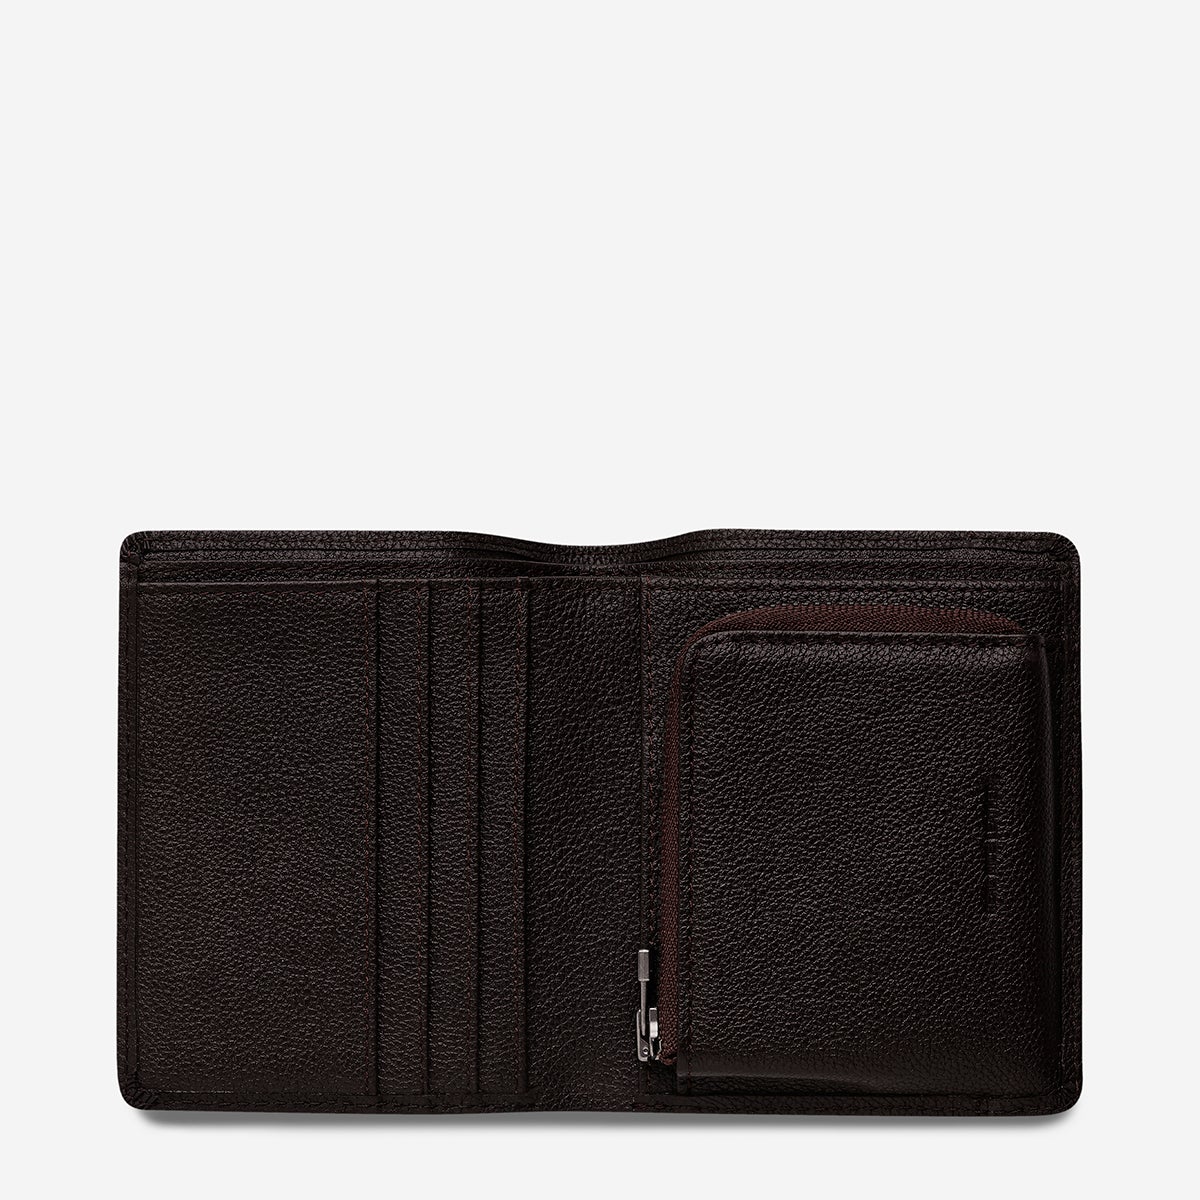 STATUS ANXIETY CLIFFORD MENS WALLET CHOCOLATE